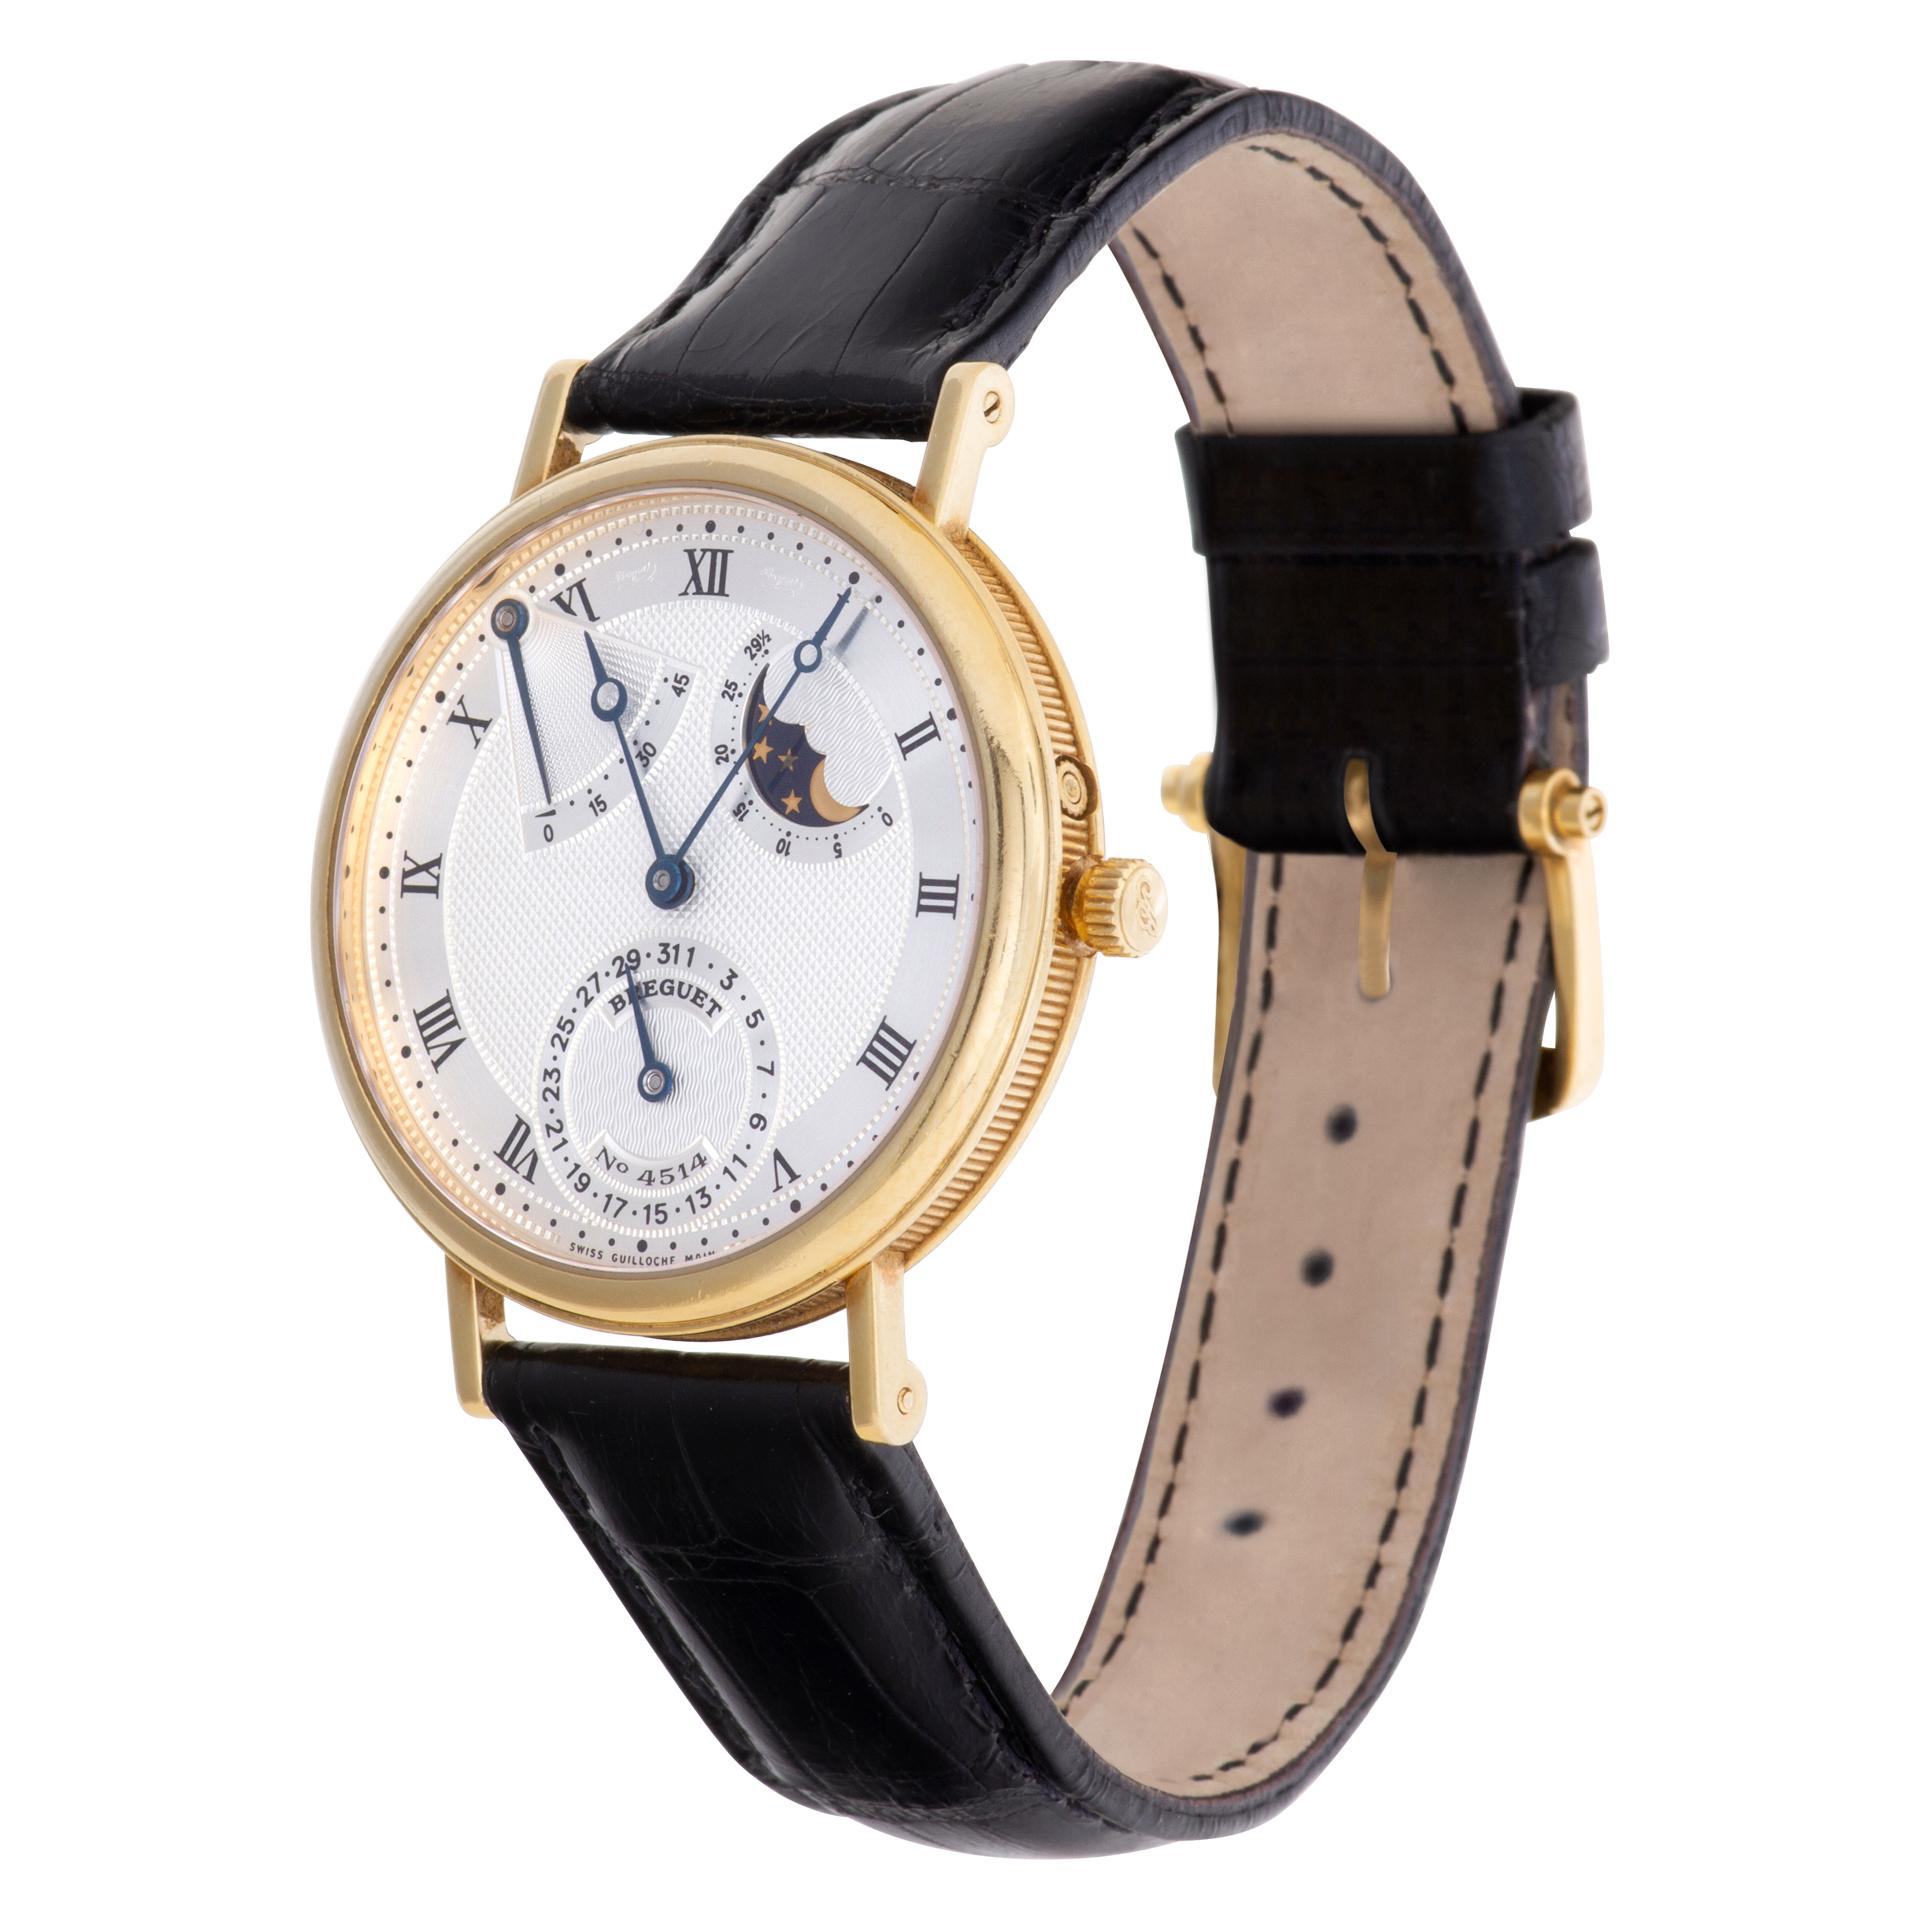 Breguet Classique in 18k yellow gold on black leather strap. Auto w/ date, moonphase and power reserve. 36 mm case size. Ref 3137. Circa 2000s. Fine Pre-owned Breguet Watch.  Certified preowned Classic Breguet Classique 3137 watch is made out of